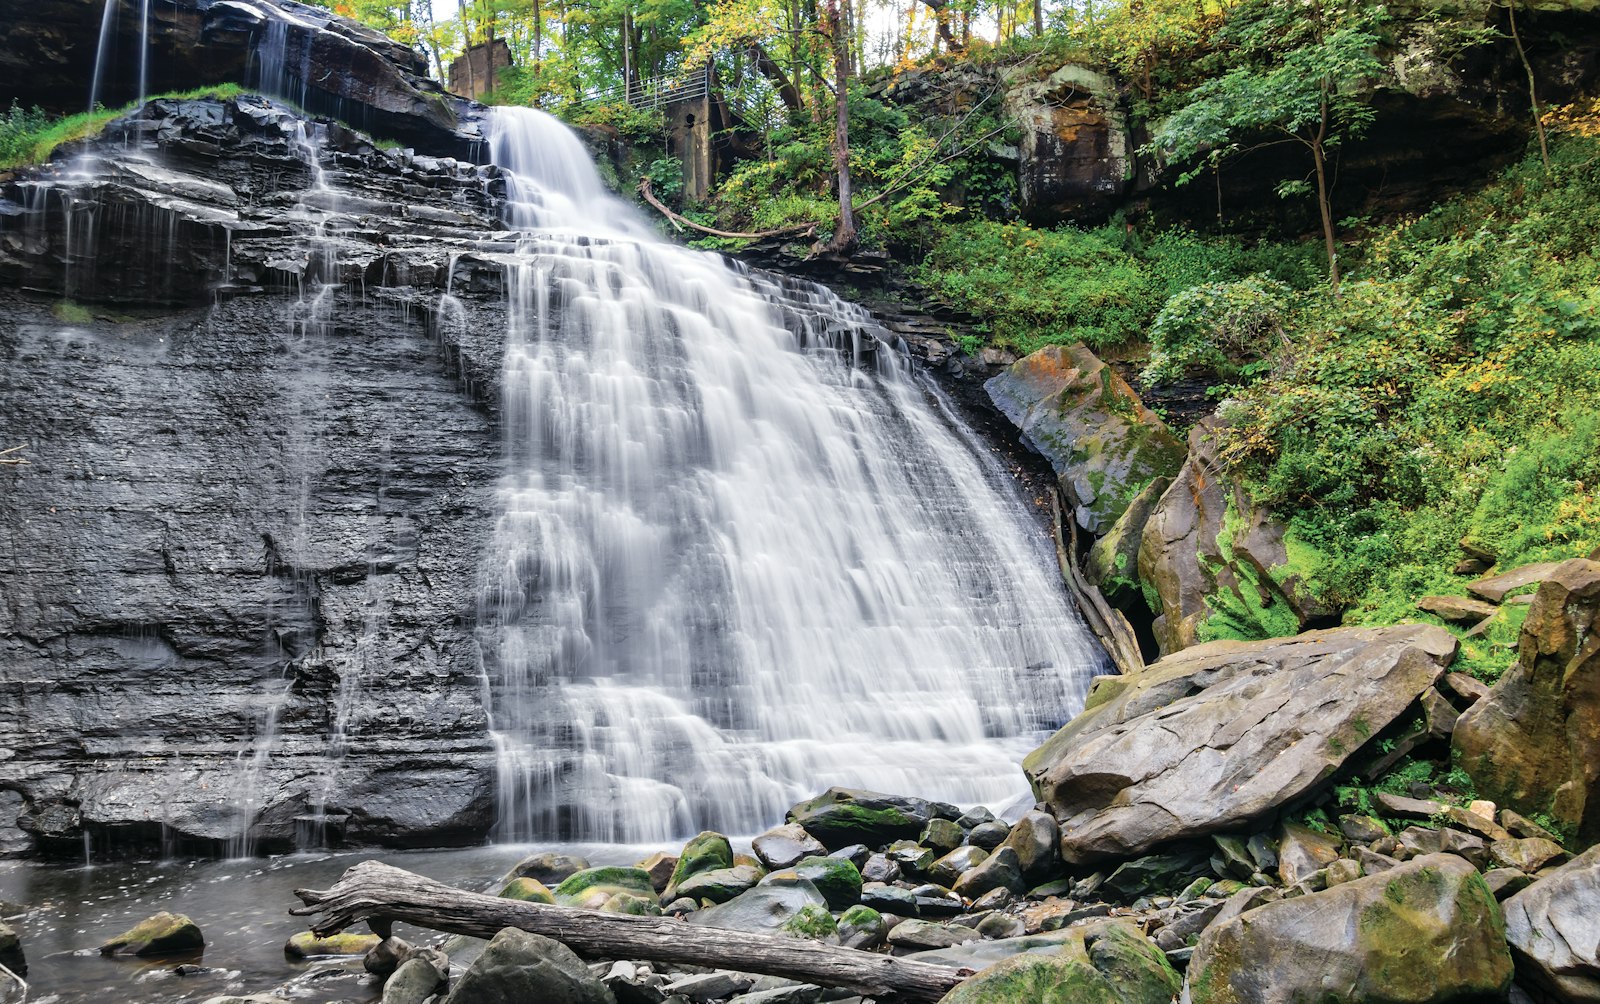 A waterfall cascades down the side of a rocky hill into a lush green forest floor below